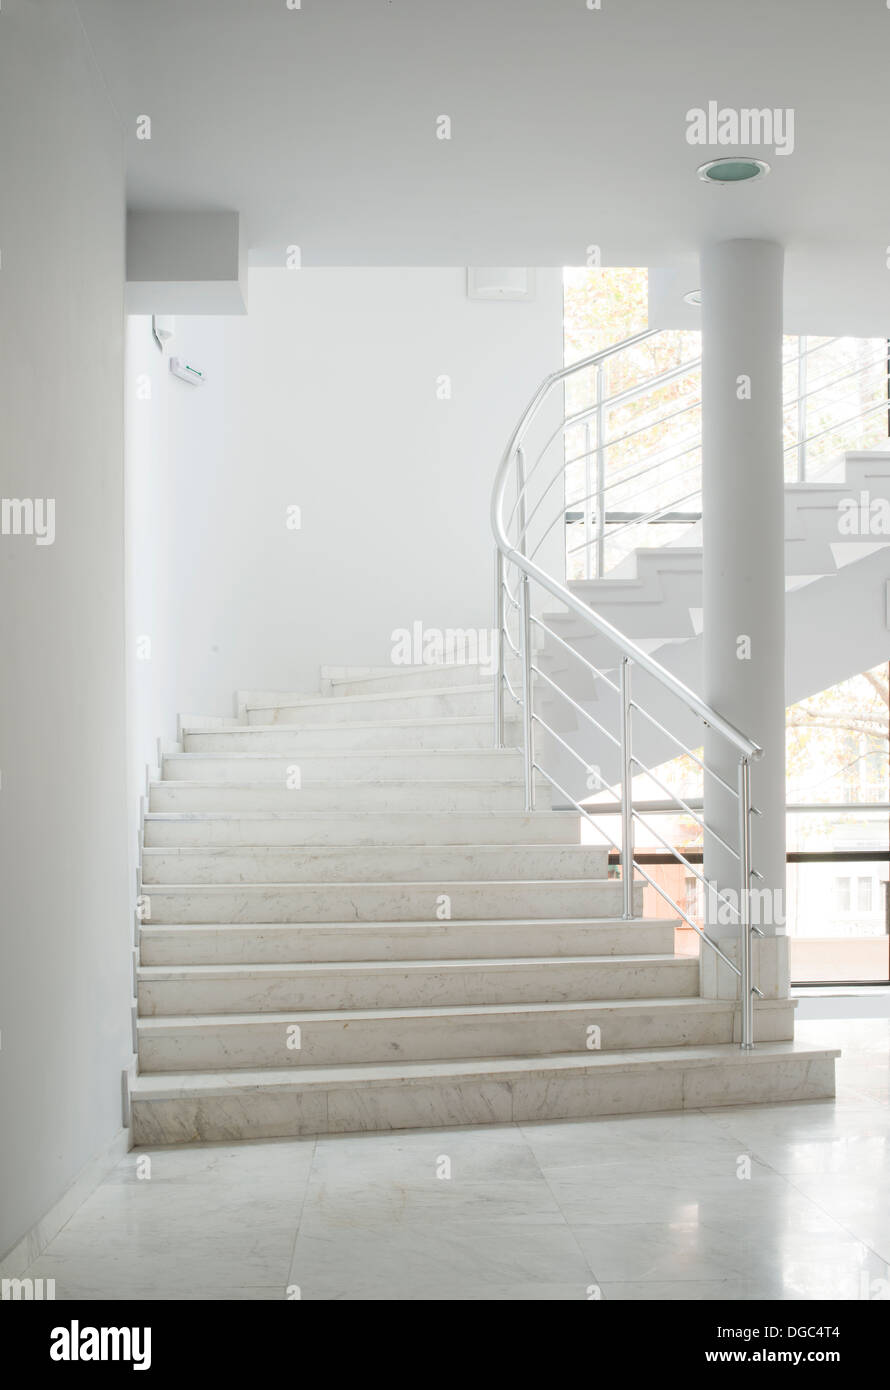 Interior of a building with white color walls. Flight of stairs Stock Photo